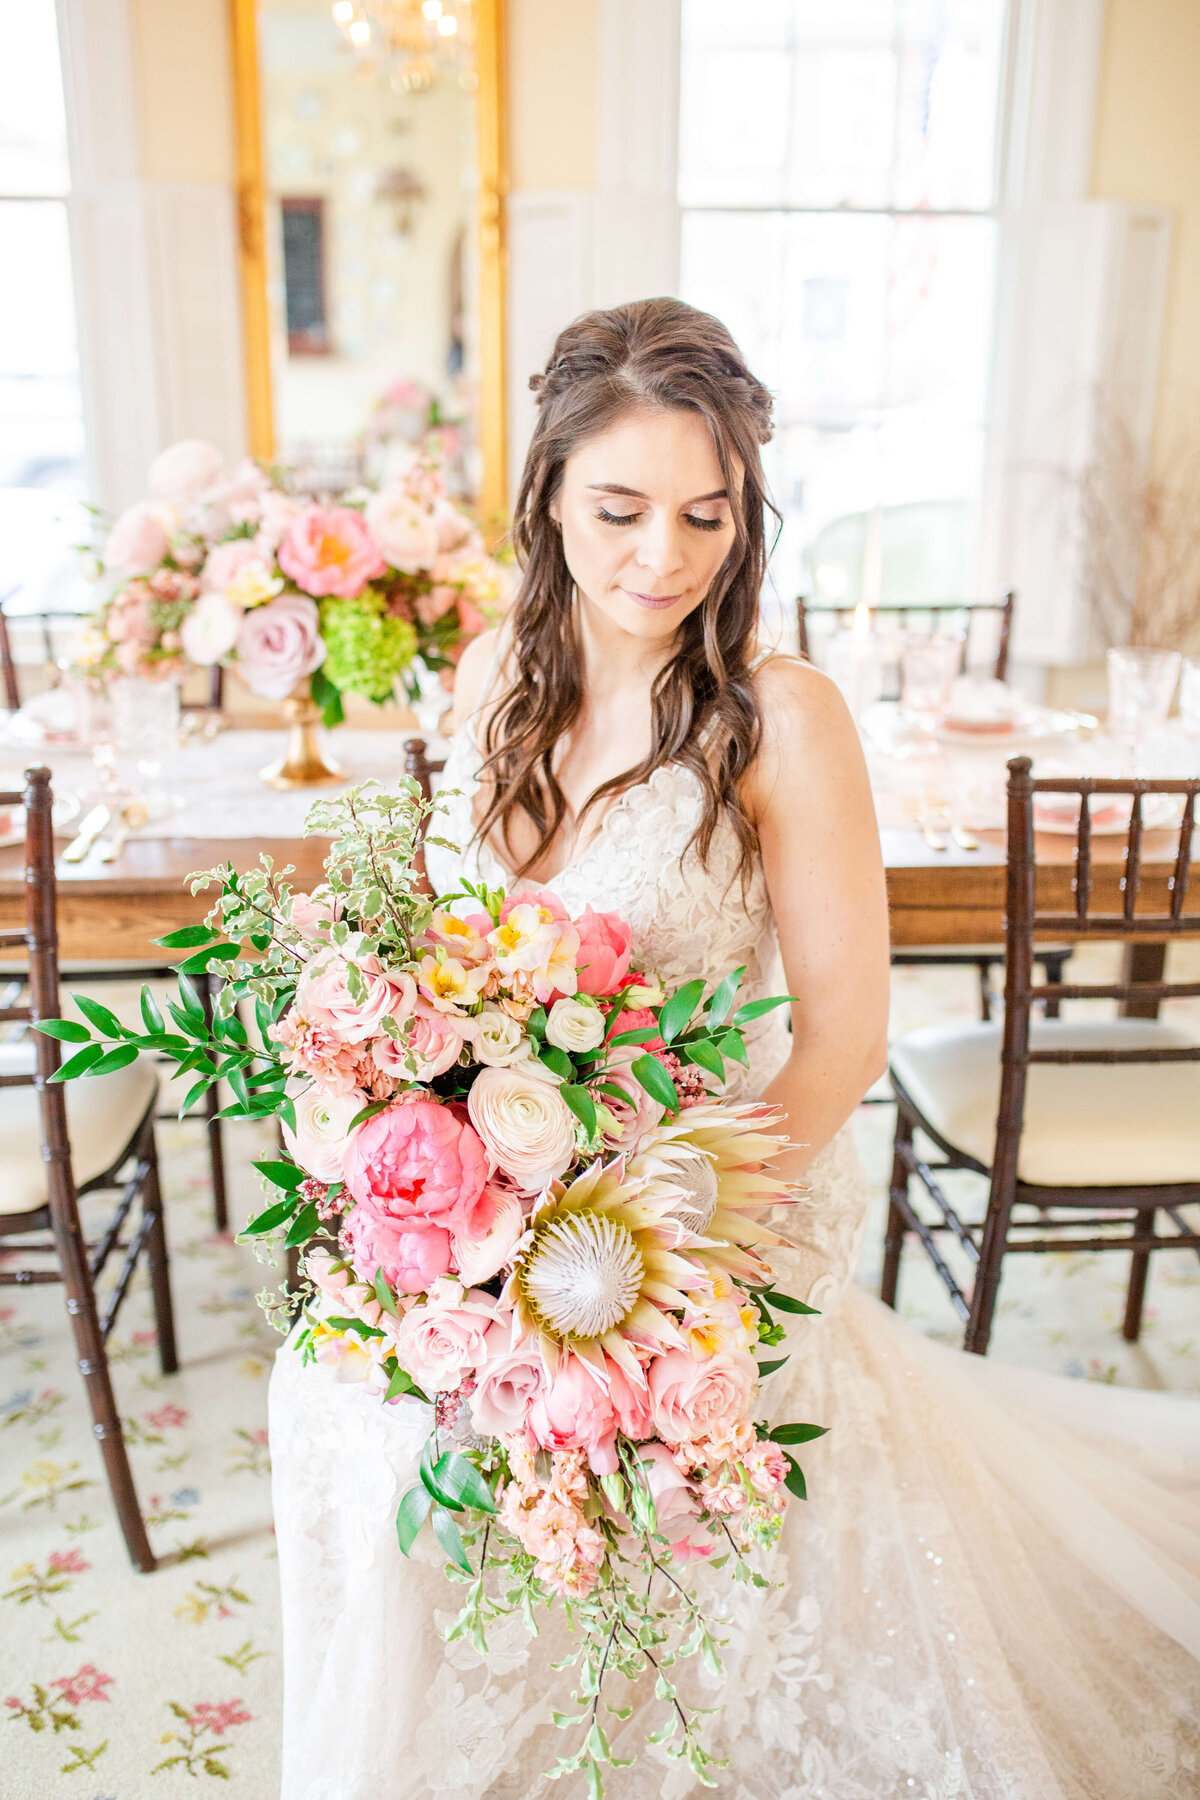 Bride-holding-bright-bouquet-wearing-wedding-dress-in-front-of-tablescape